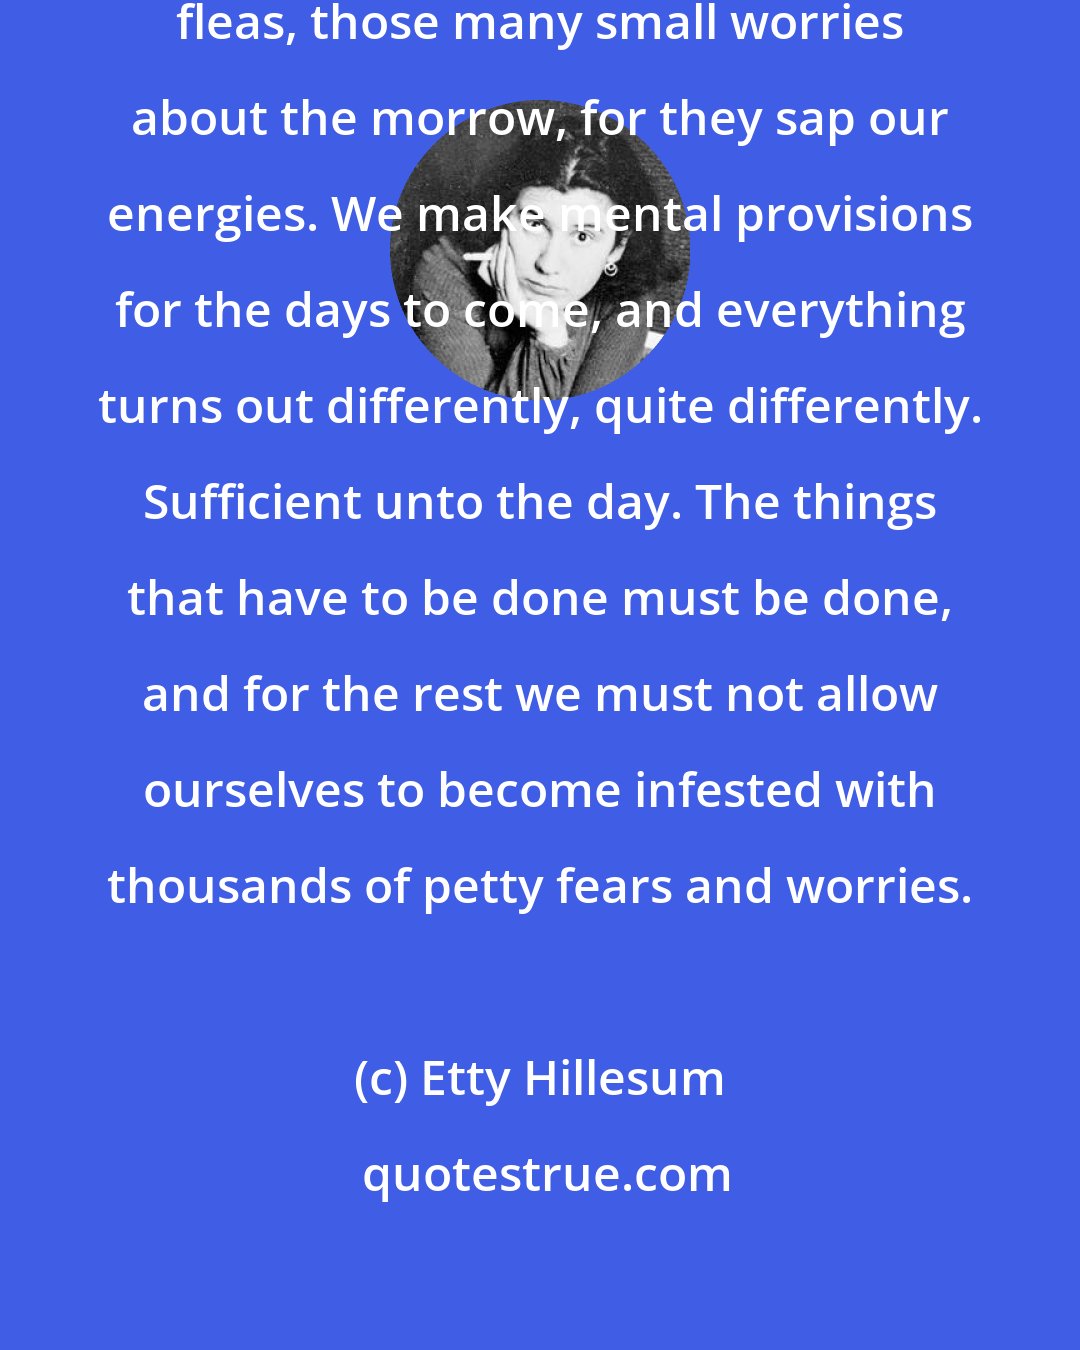 Etty Hillesum: We have to fight them daily, like fleas, those many small worries about the morrow, for they sap our energies. We make mental provisions for the days to come, and everything turns out differently, quite differently. Sufficient unto the day. The things that have to be done must be done, and for the rest we must not allow ourselves to become infested with thousands of petty fears and worries.